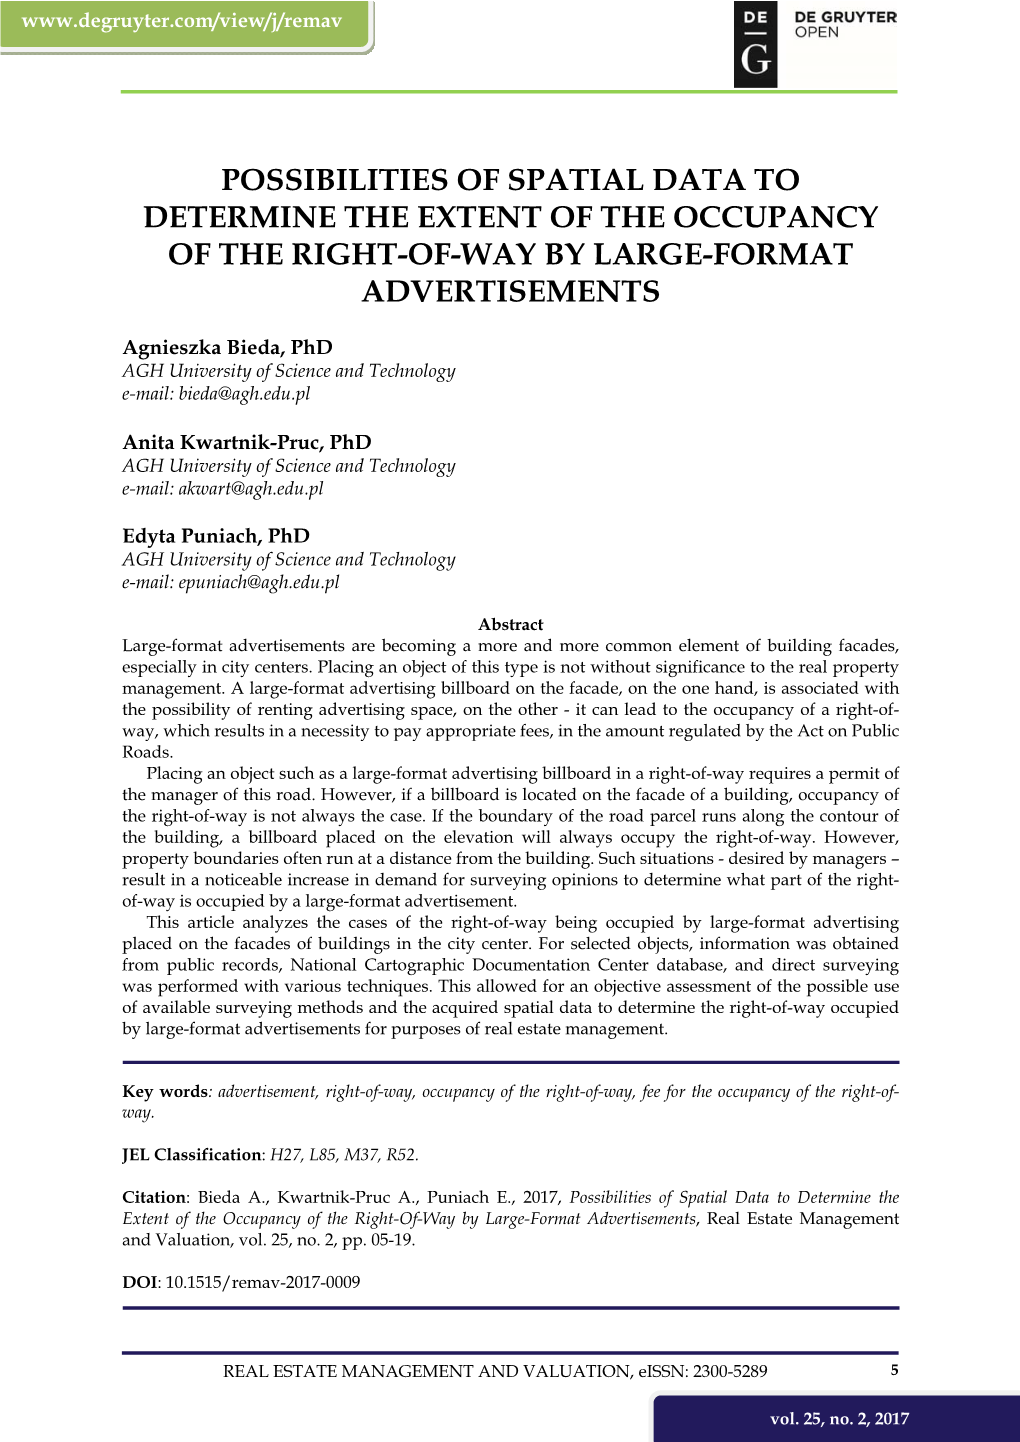 Possibilities of Spatial Data to Determine the Extent of the Occupancy of the Right-Of-Way by Large-Format Advertisements